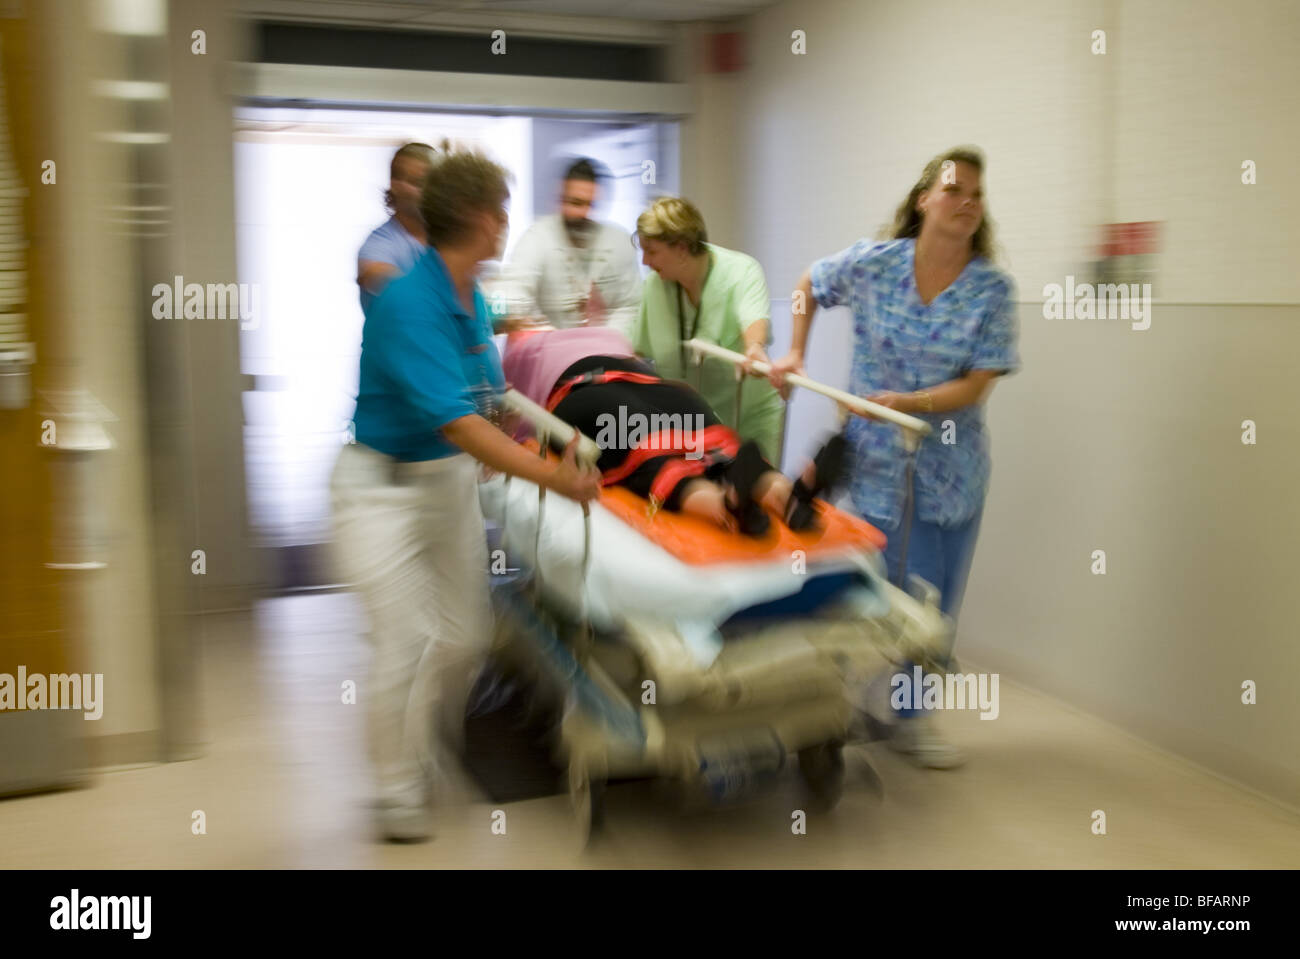 Emergency room, EMTs rush patient to operating room Stock Photo - Alamy